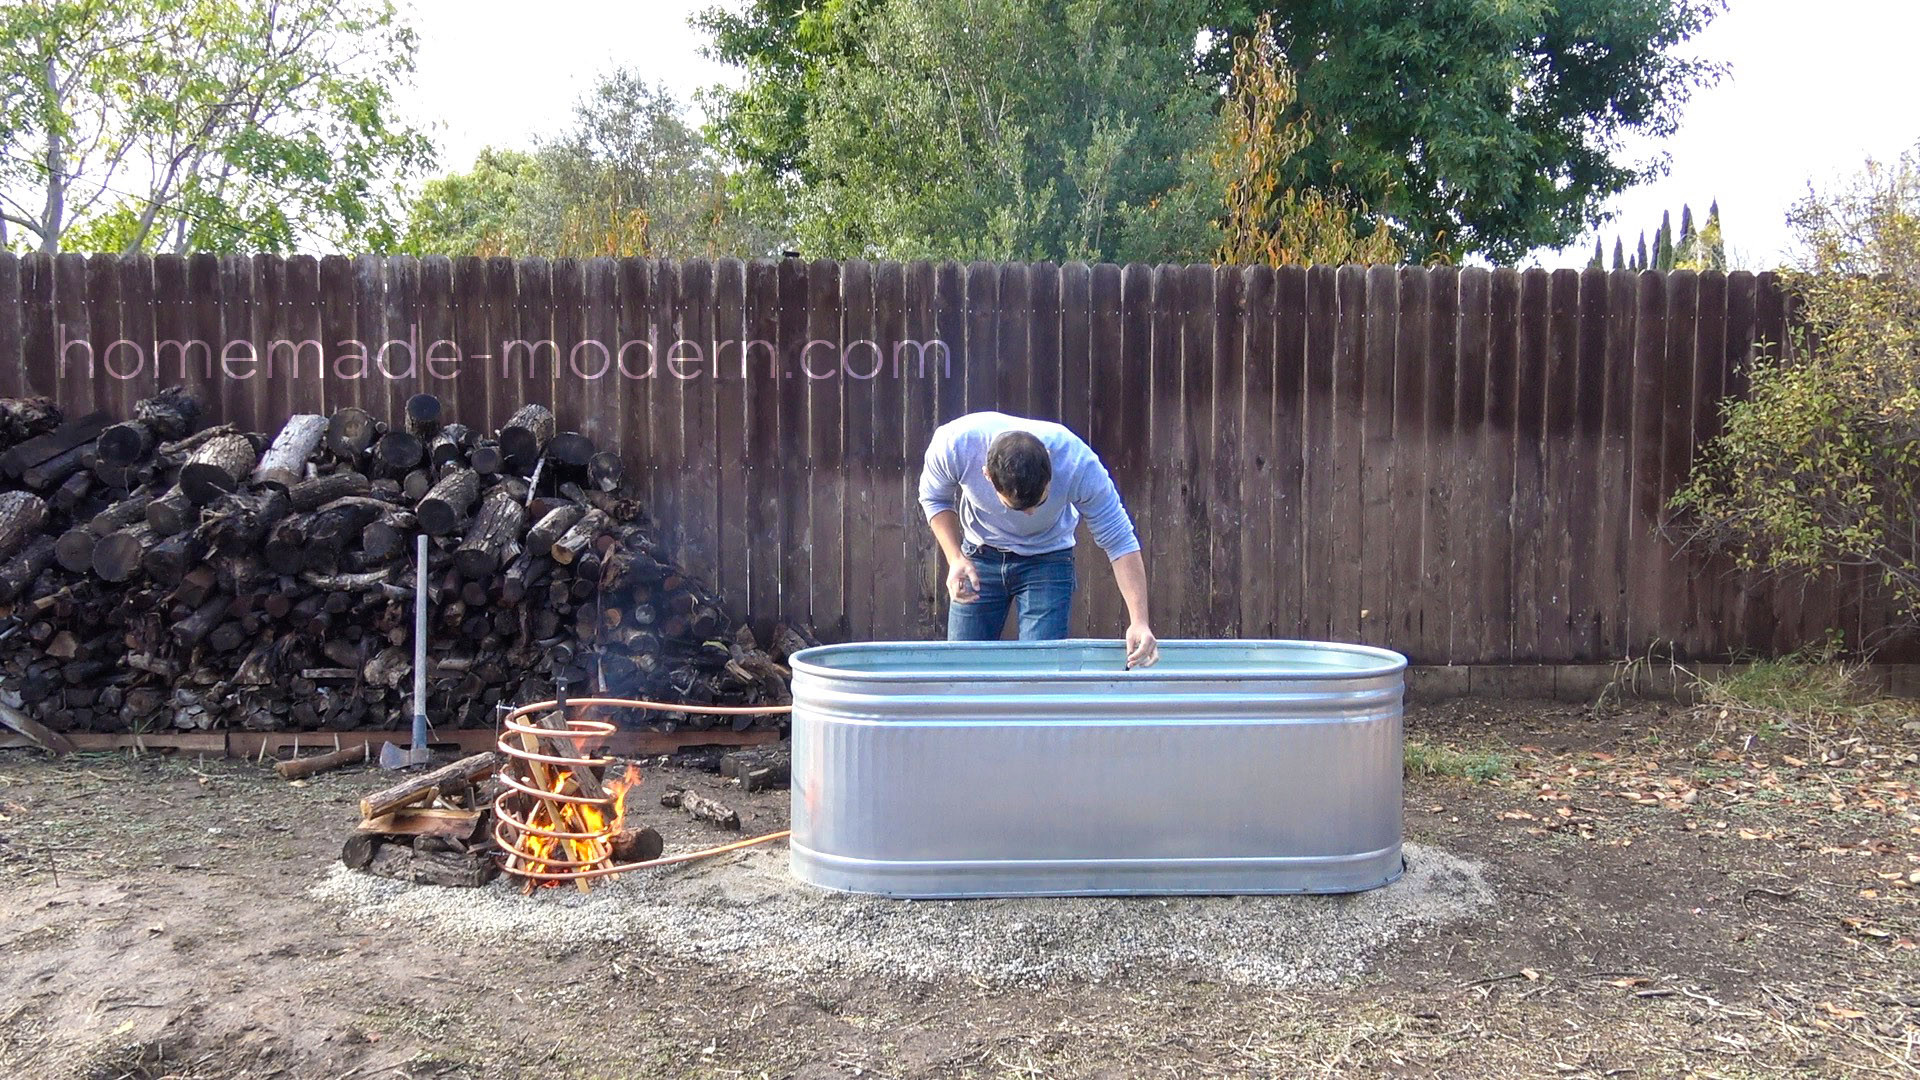 Best ideas about DIY Wooden Hot Tub
. Save or Pin HomeMade Modern EP112 DIY Wood Fired Hot Tub Now.